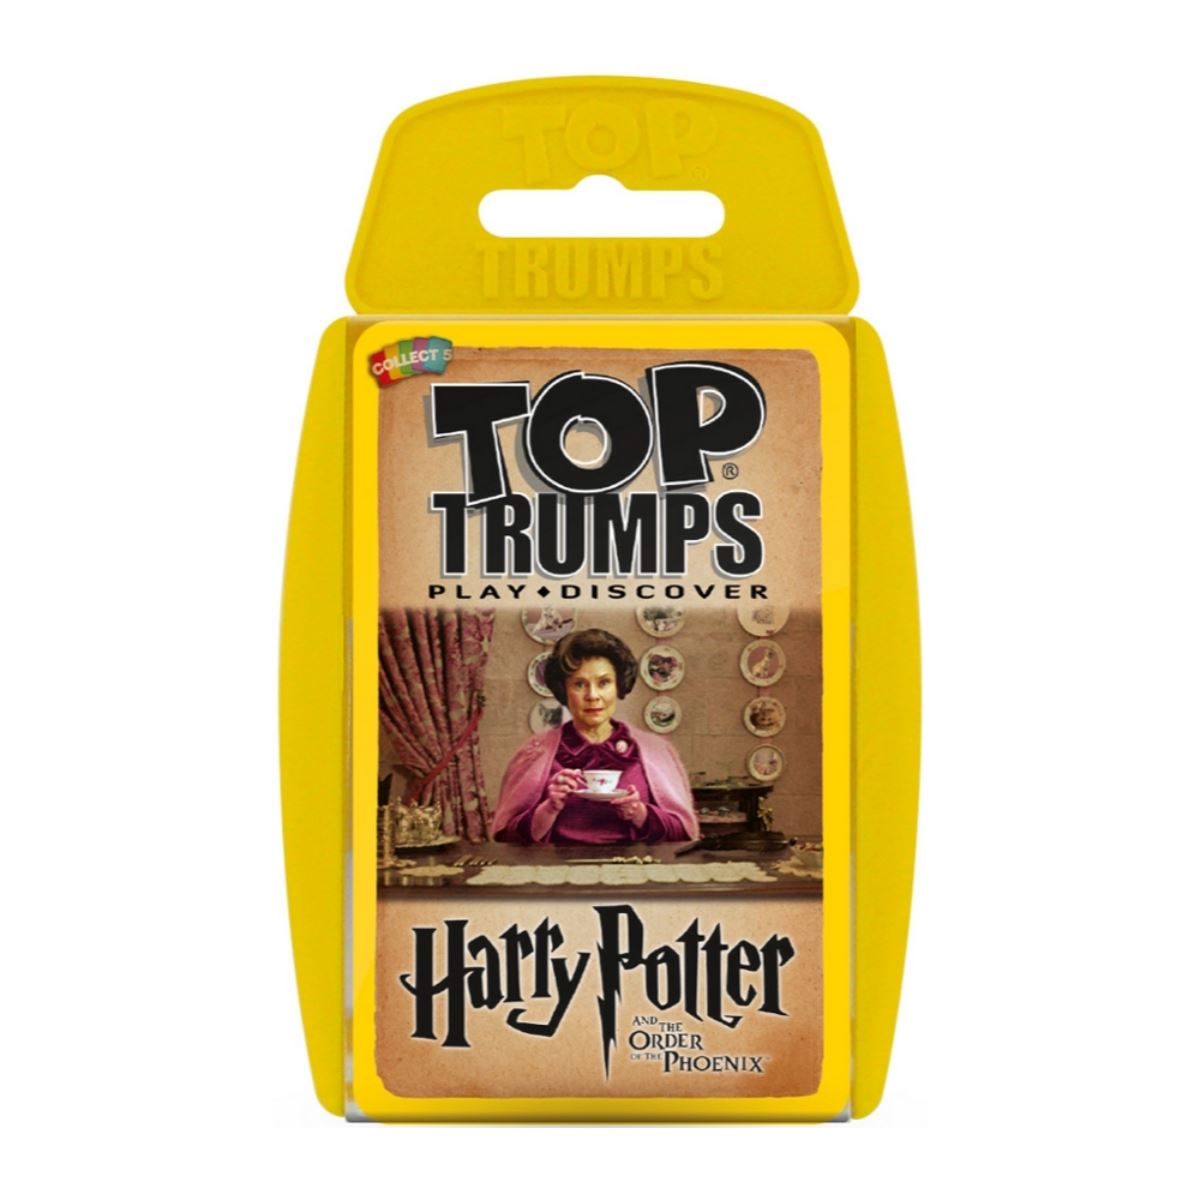 Harry Potter & the Order of the Phoenix Top Trumps Card Game